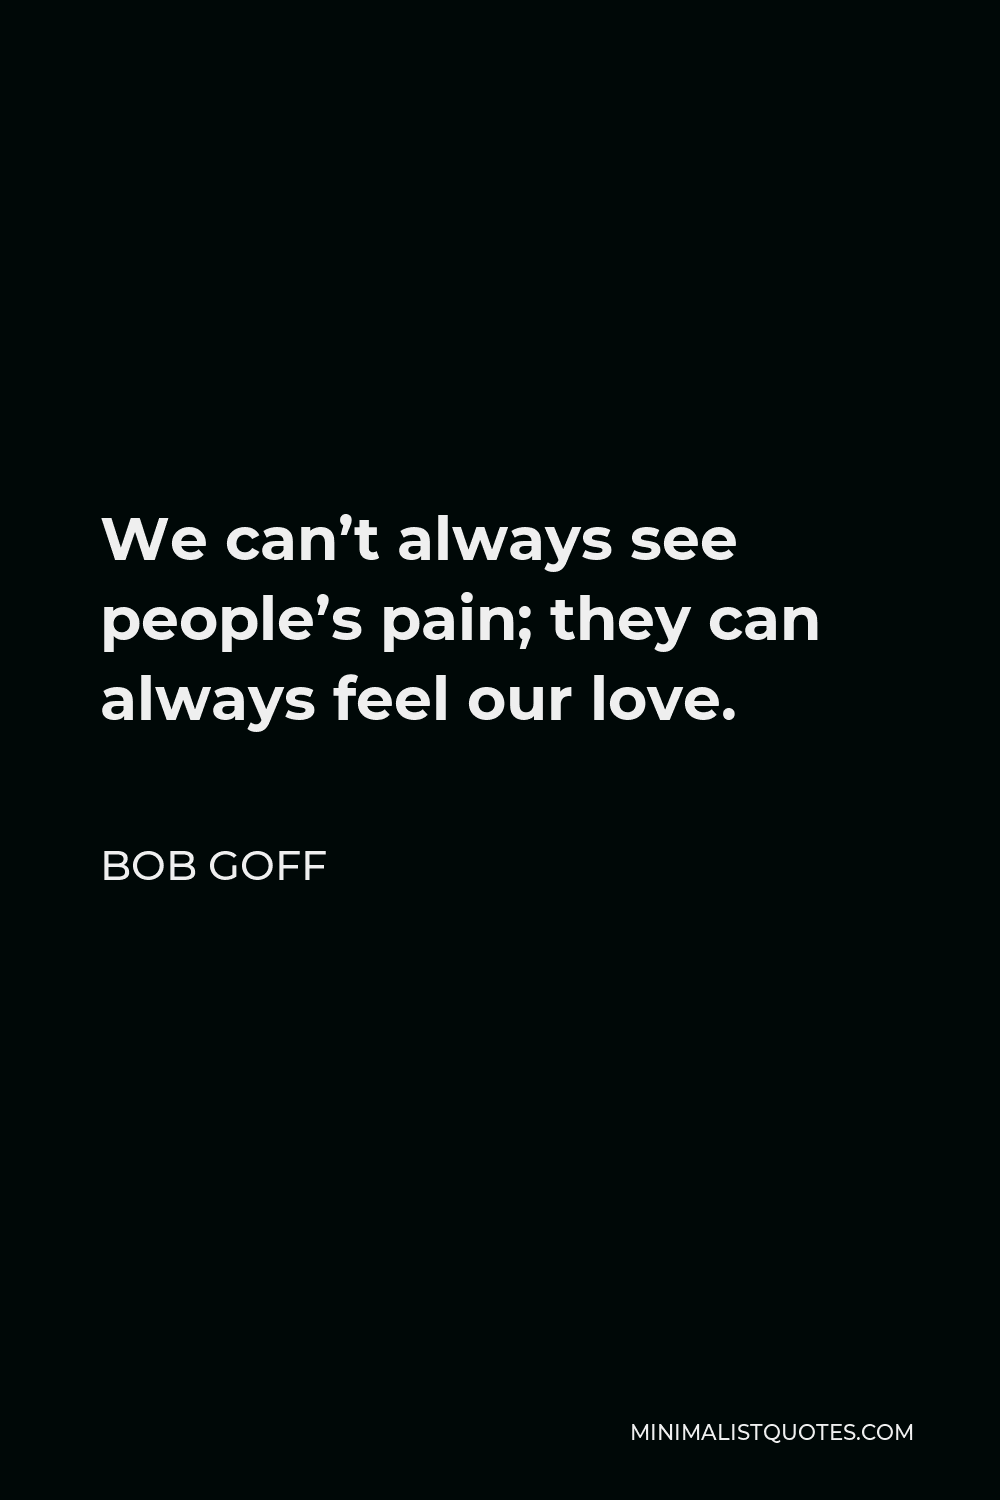 Bob Goff Quote - We can’t always see people’s pain; they can always feel our love.